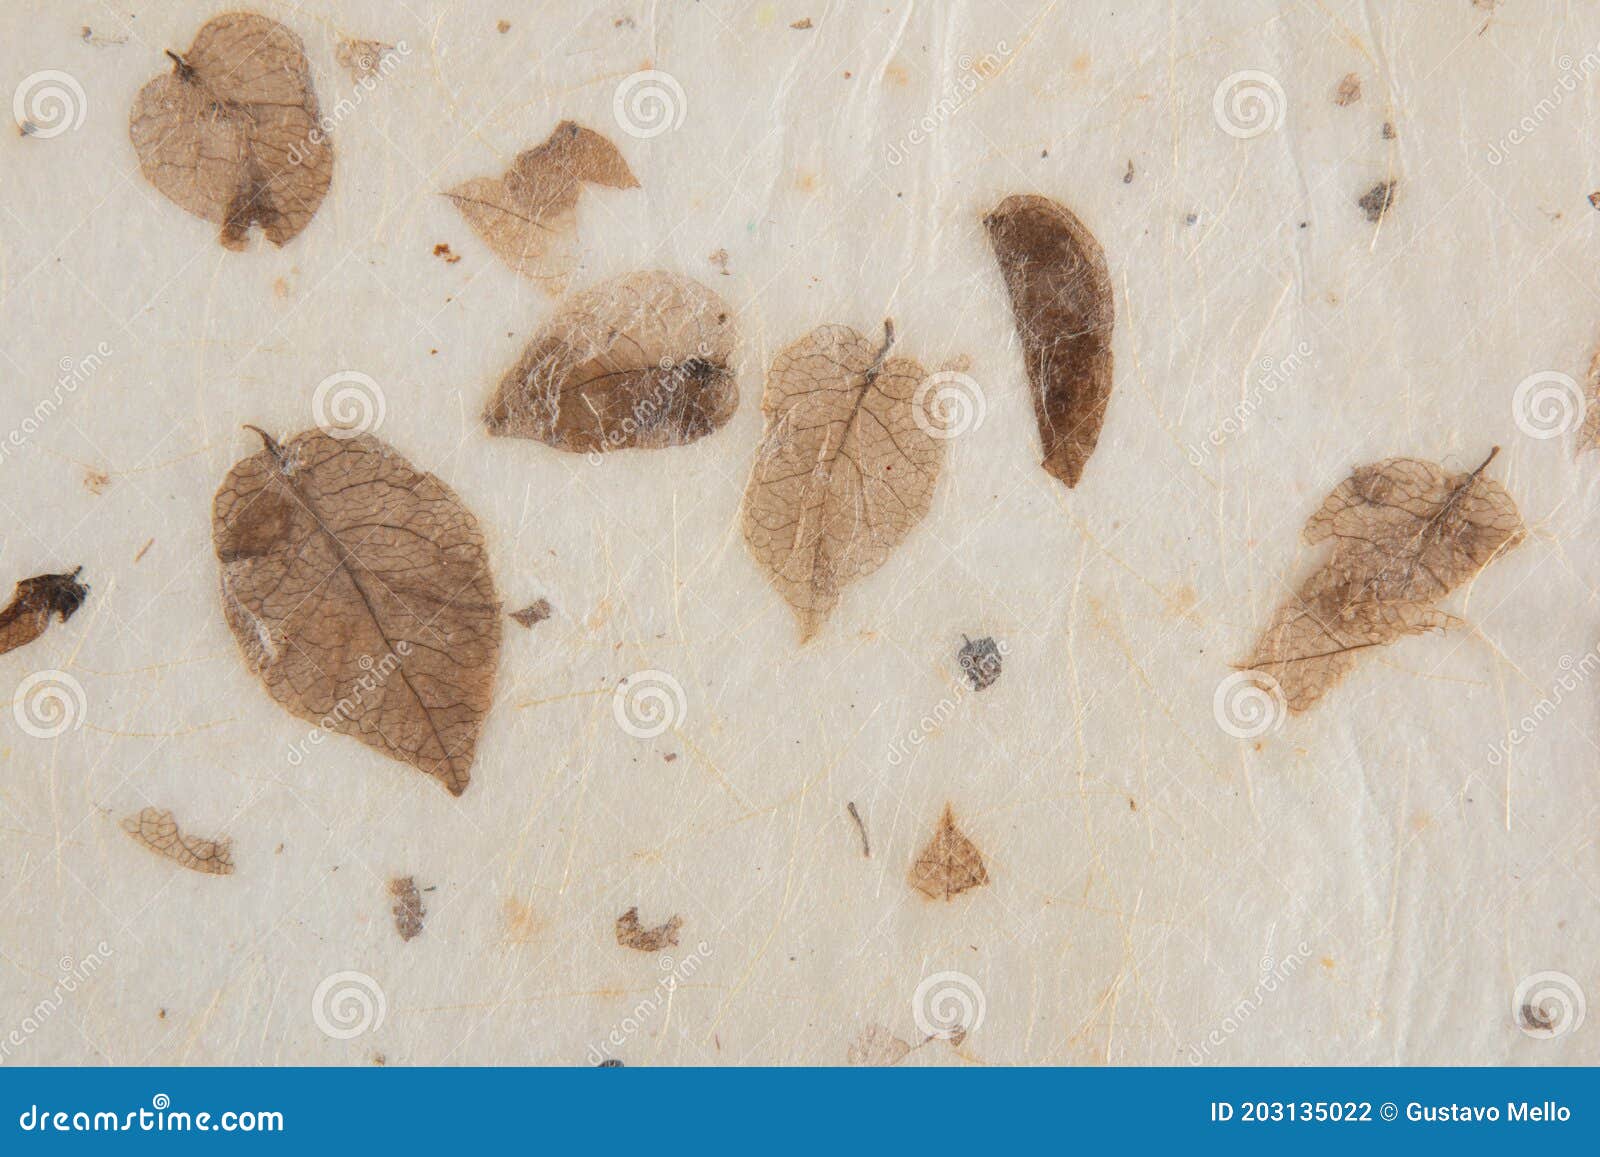 closeup of handmade paper texture vintage background with leaf